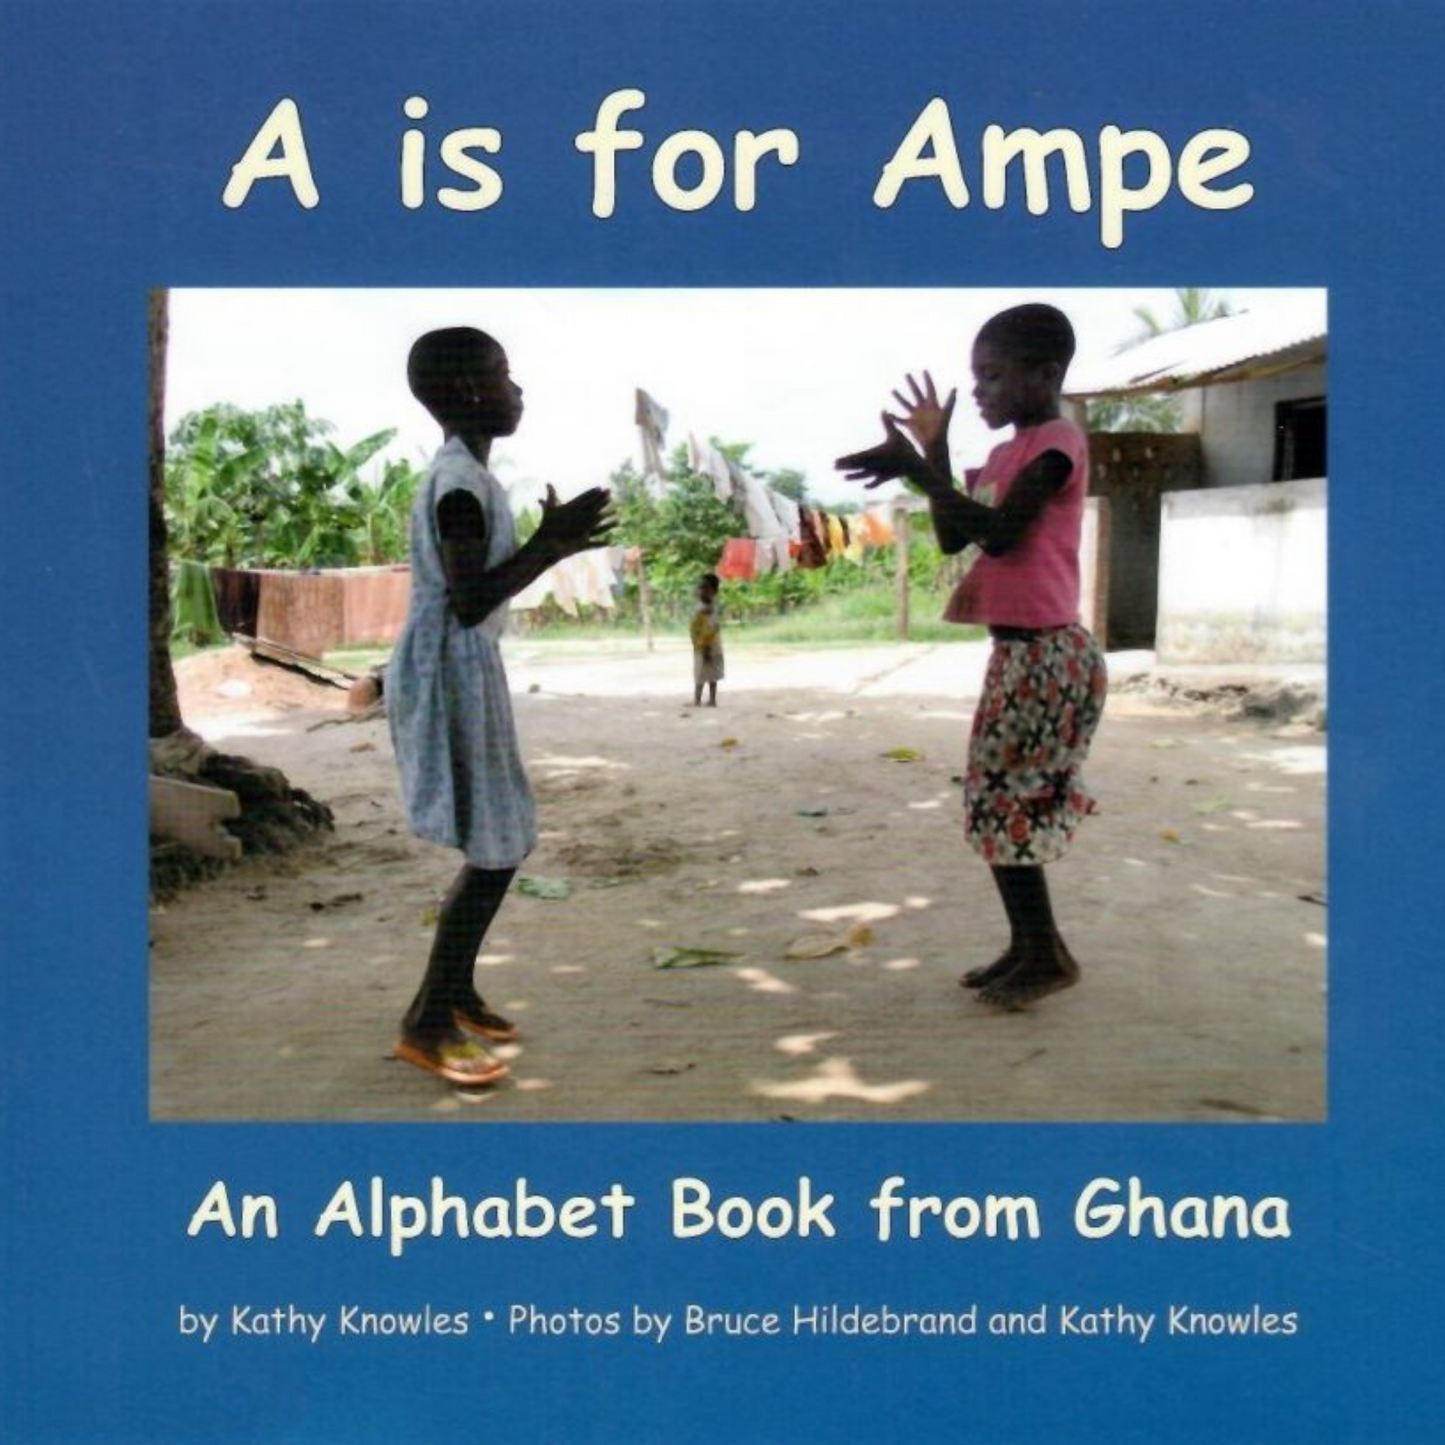 A is for Ampe